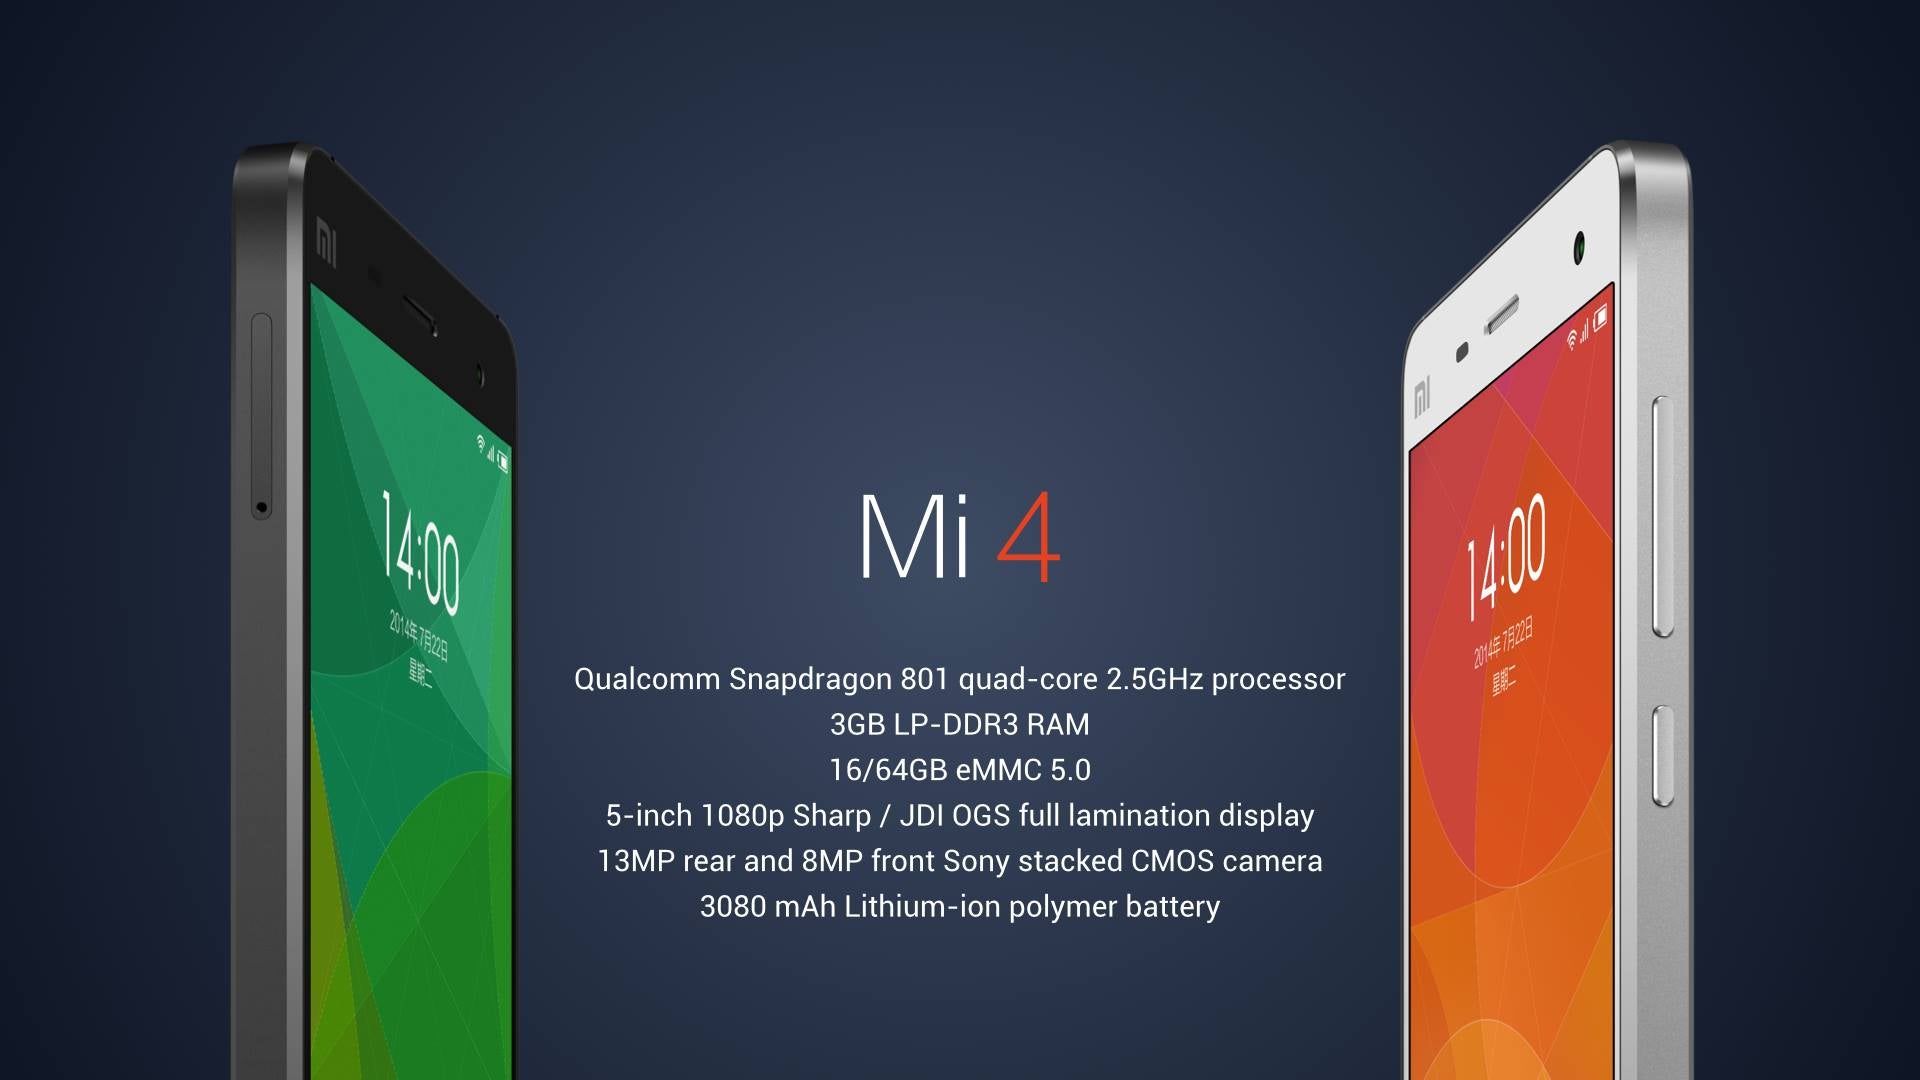 Xiaomi Mi 4 officially unveiled: claims to be the fastest smartphone in the world